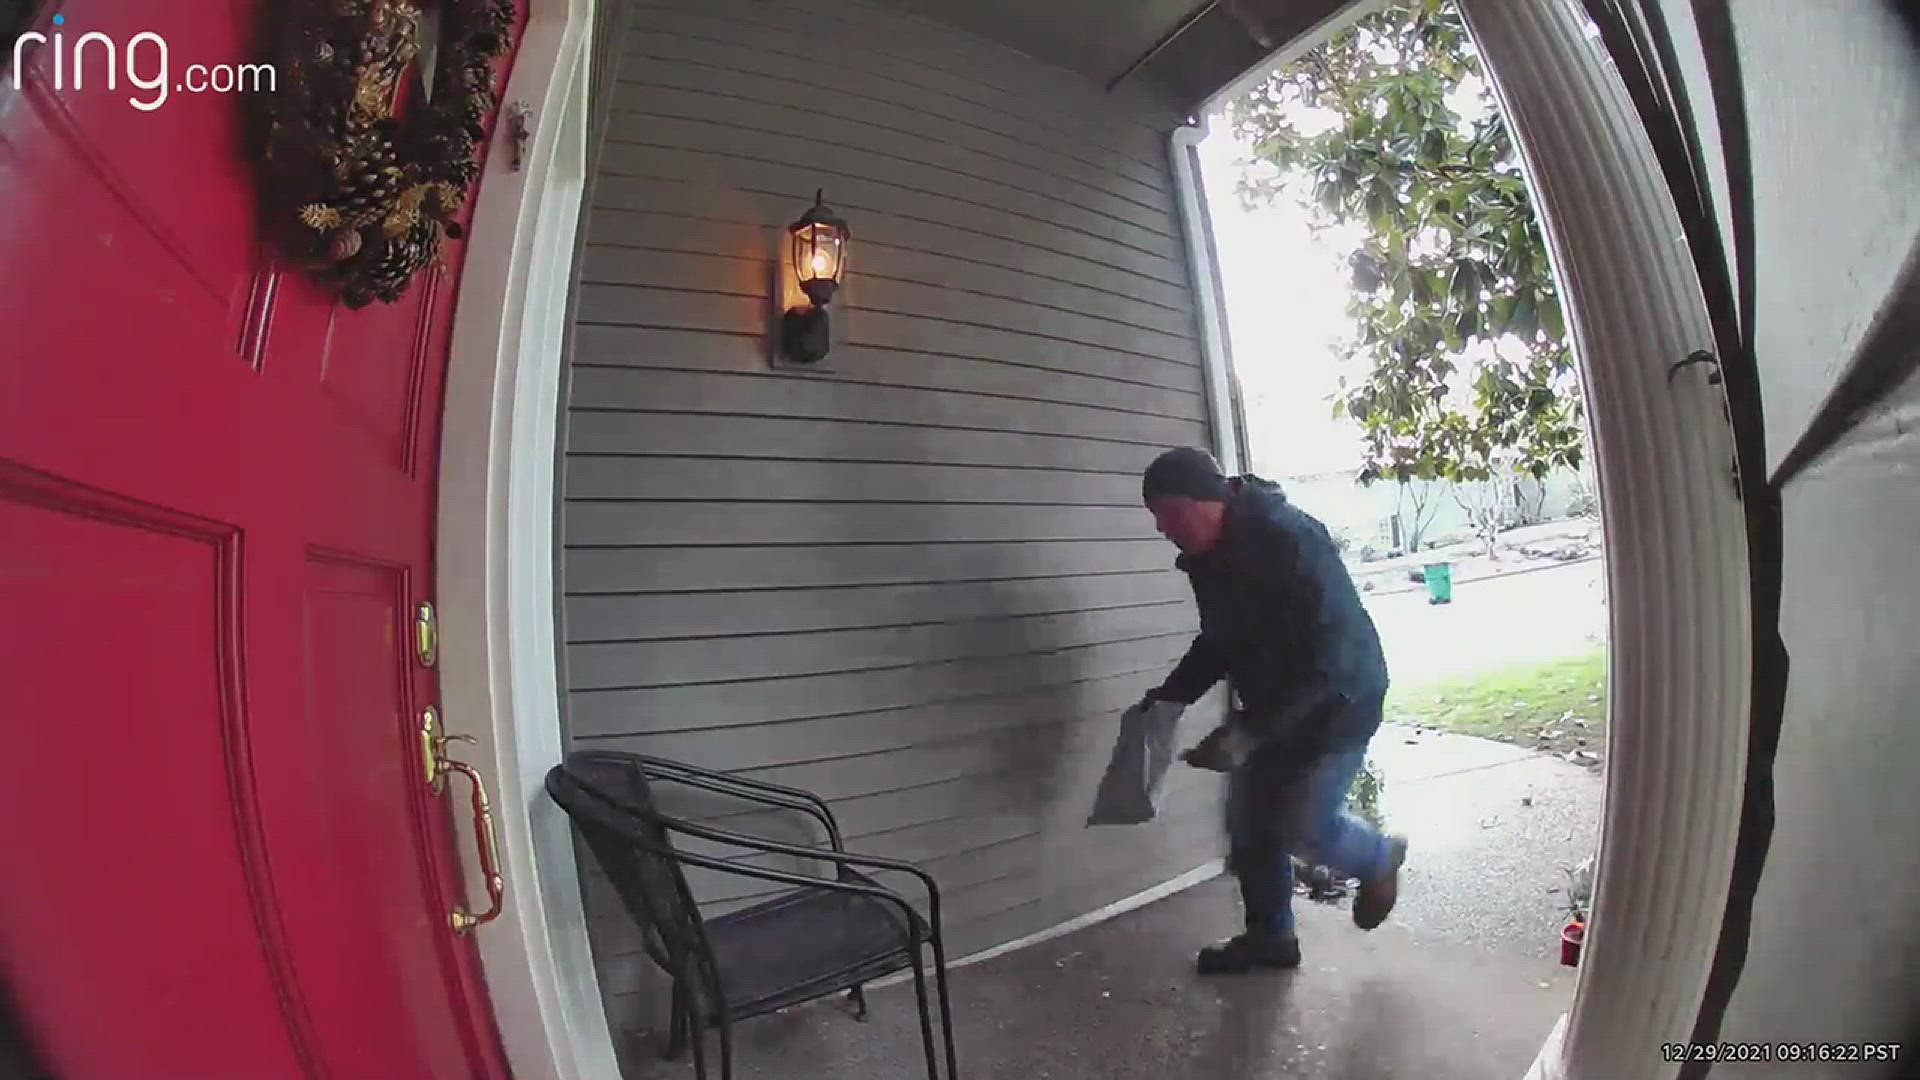 The homeowner was out of town and got a notification from his security system, showing video of the man returning the cash.